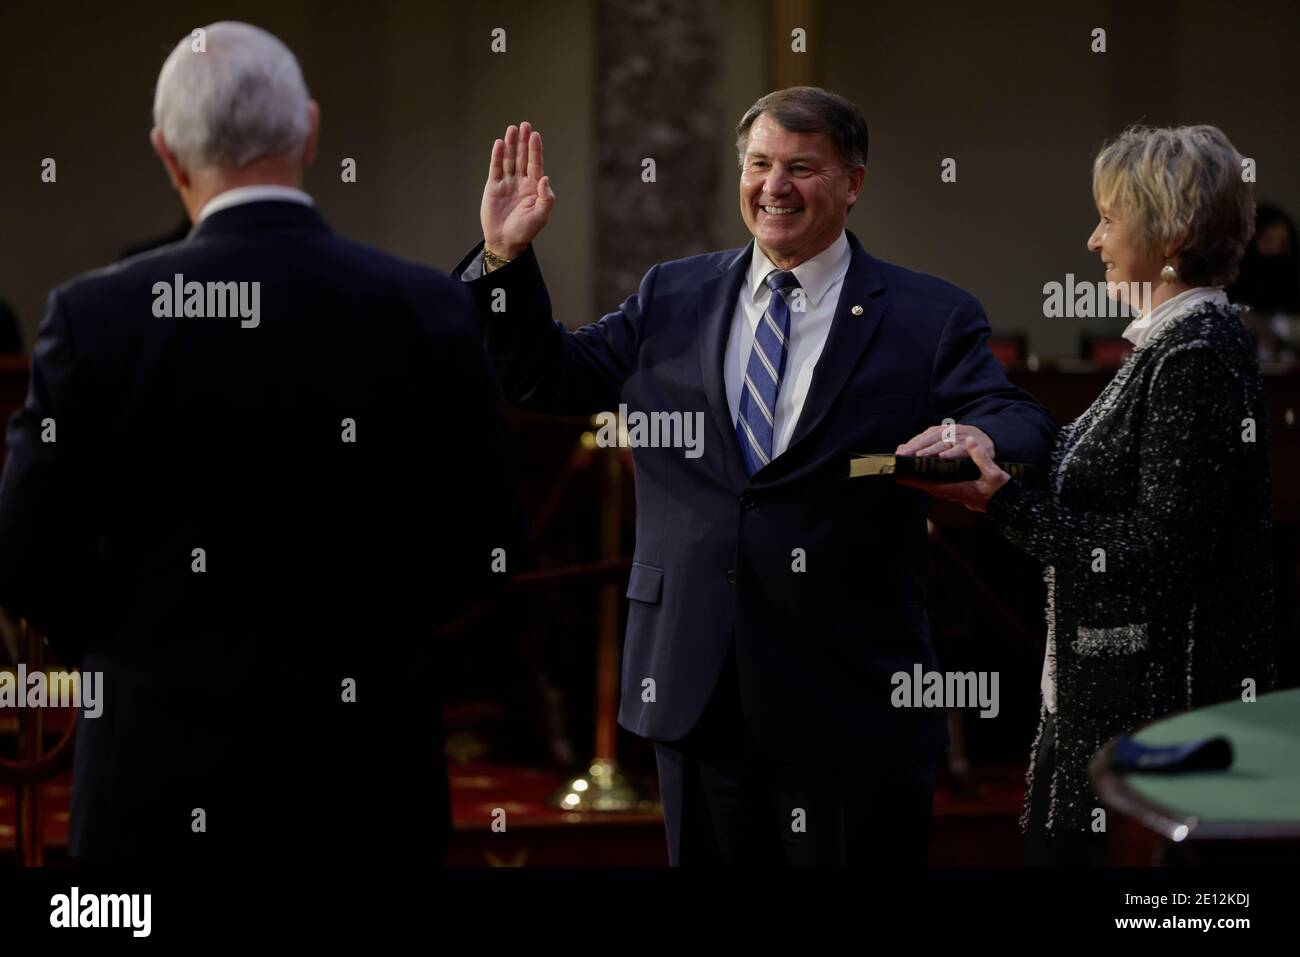 United States Senator Mike Rounds (Republican of South Dakota), center, smiles while being ceremoniously sworn-in by U.S. Vice President Mike Pence, left, at the U.S. Capitol in Washington, DC, U.S., on Sunday, Jan. 3, 2021. The 117th Congress begins today with the election of the speaker of the House and administration of the oath of office for lawmakers in both chambers, procedures that will be modified to account for Covid-19 precautions. Credit: Samuel Corum/Pool via CNP/MediaPunch Stock Photo